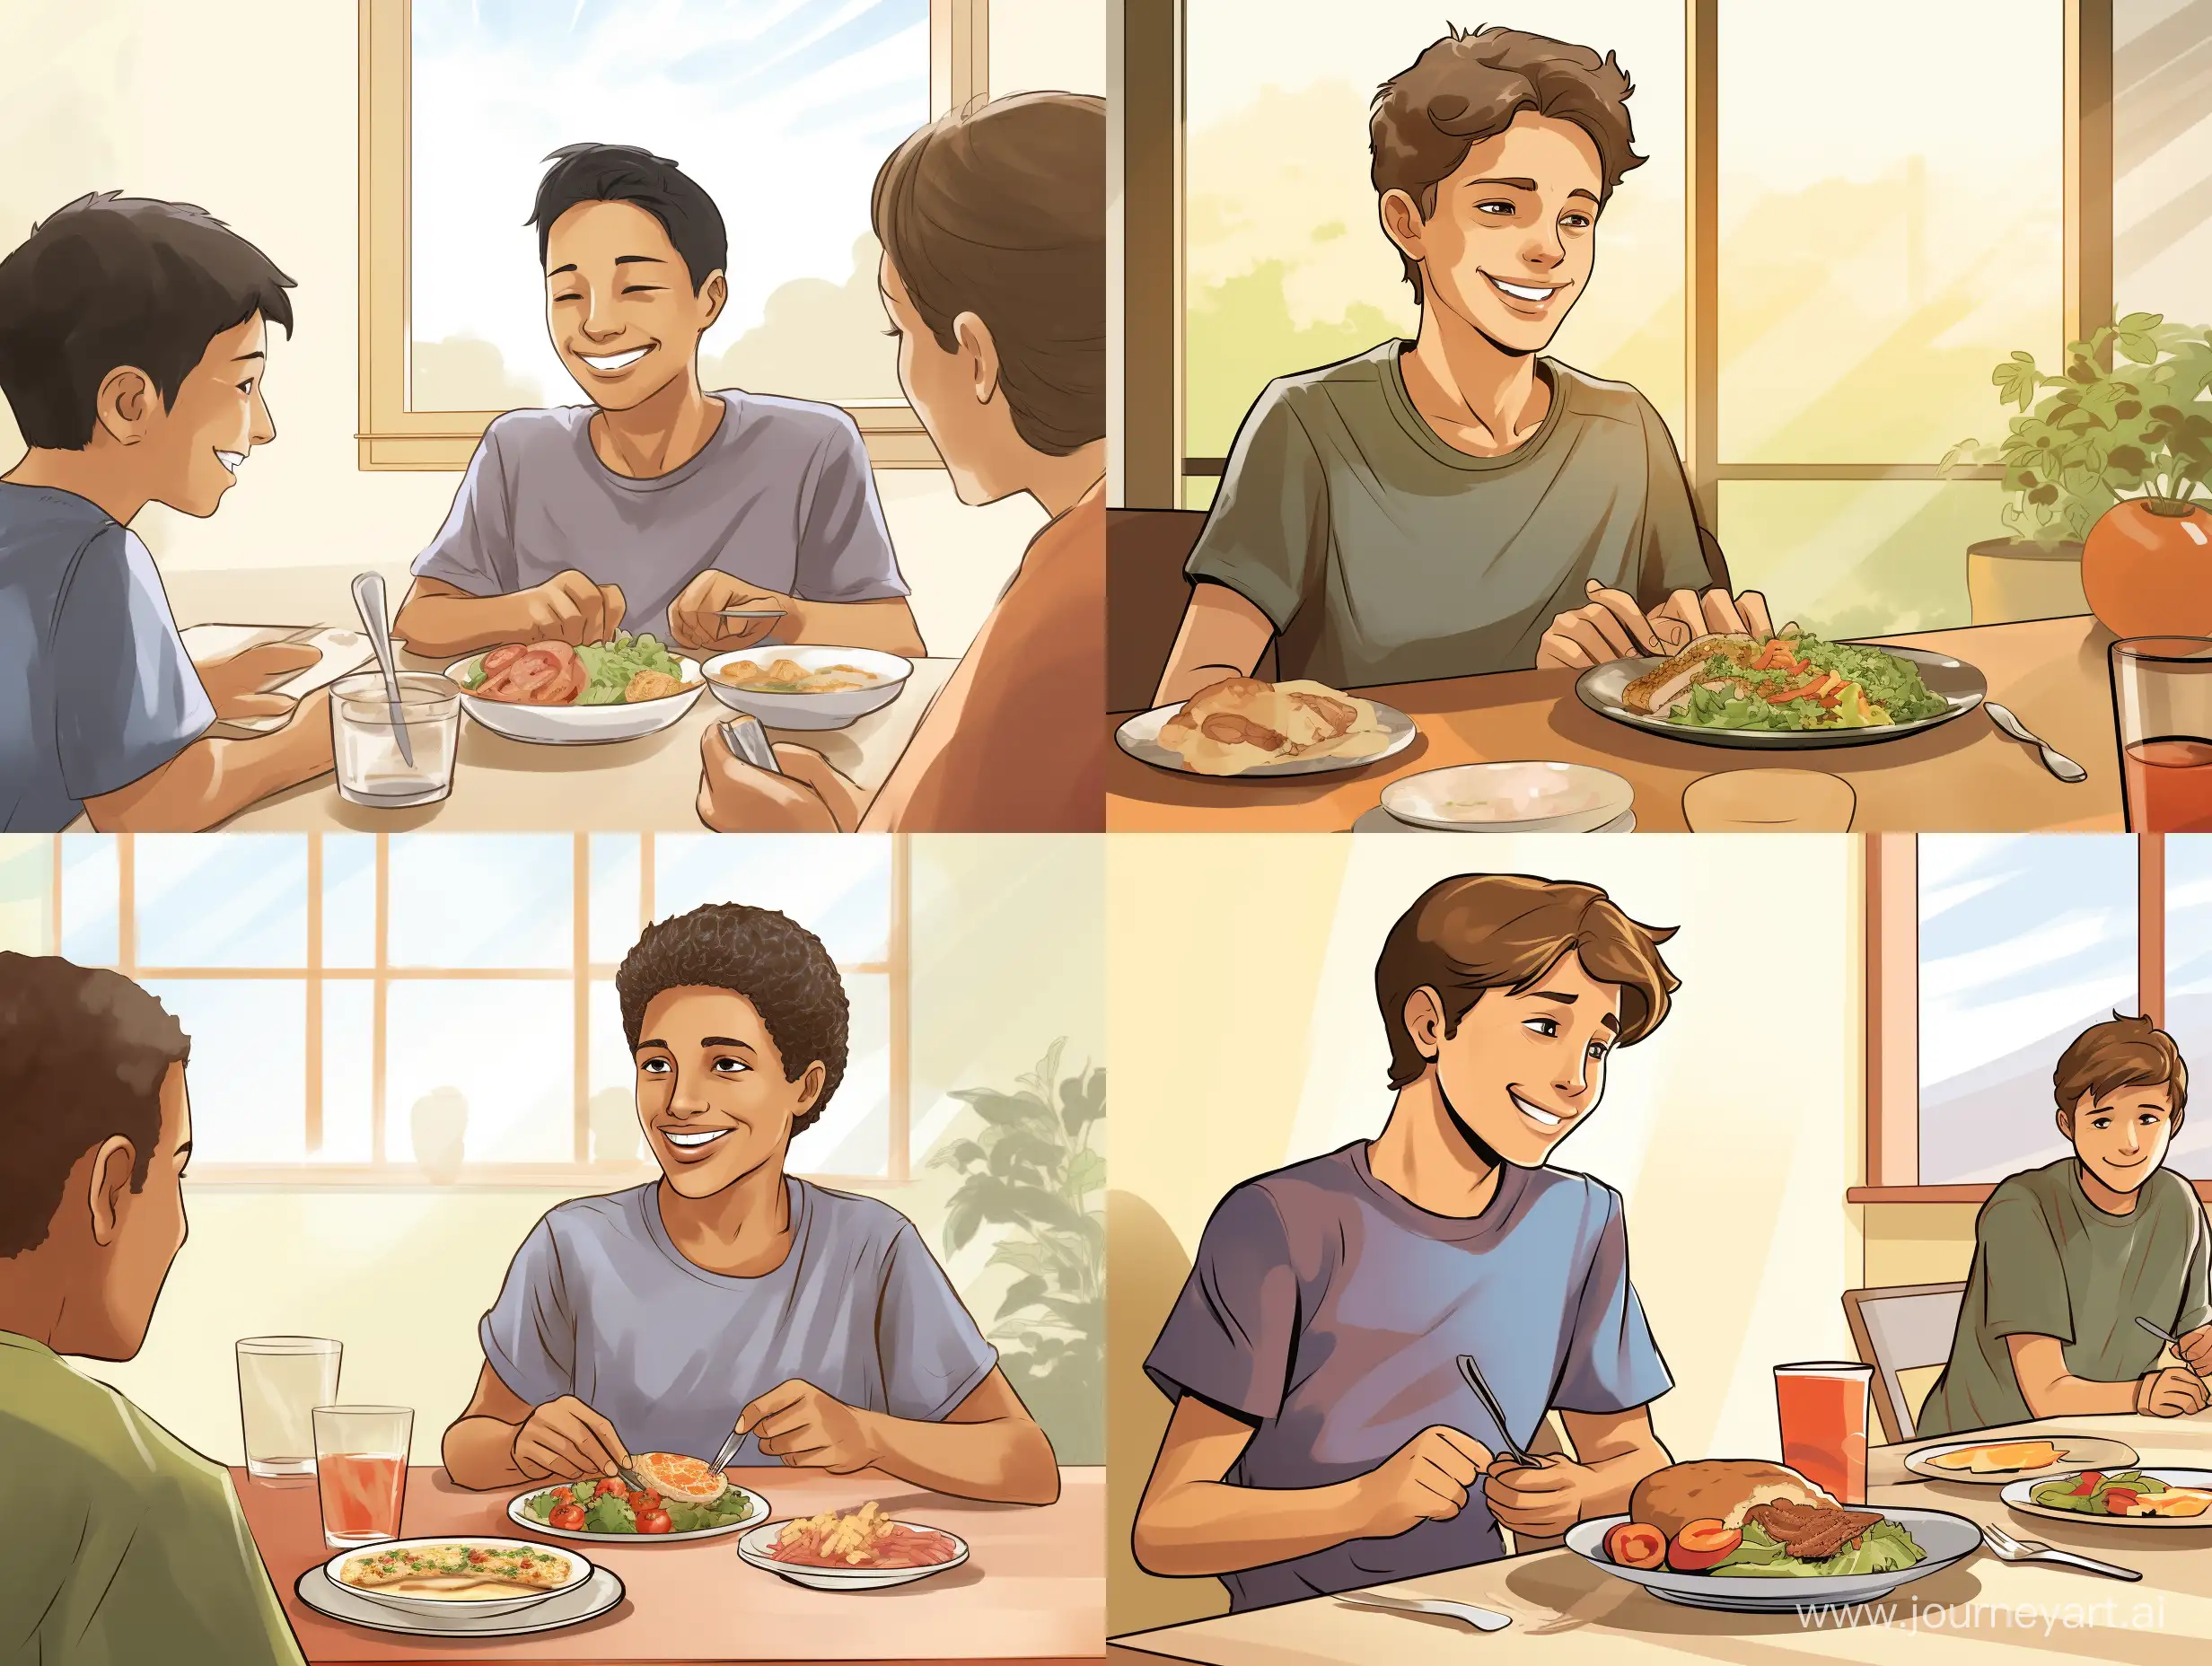 Joyful-Family-Lunch-Smiling-Teenage-Boy-Bonds-with-Parents-and-Siblings